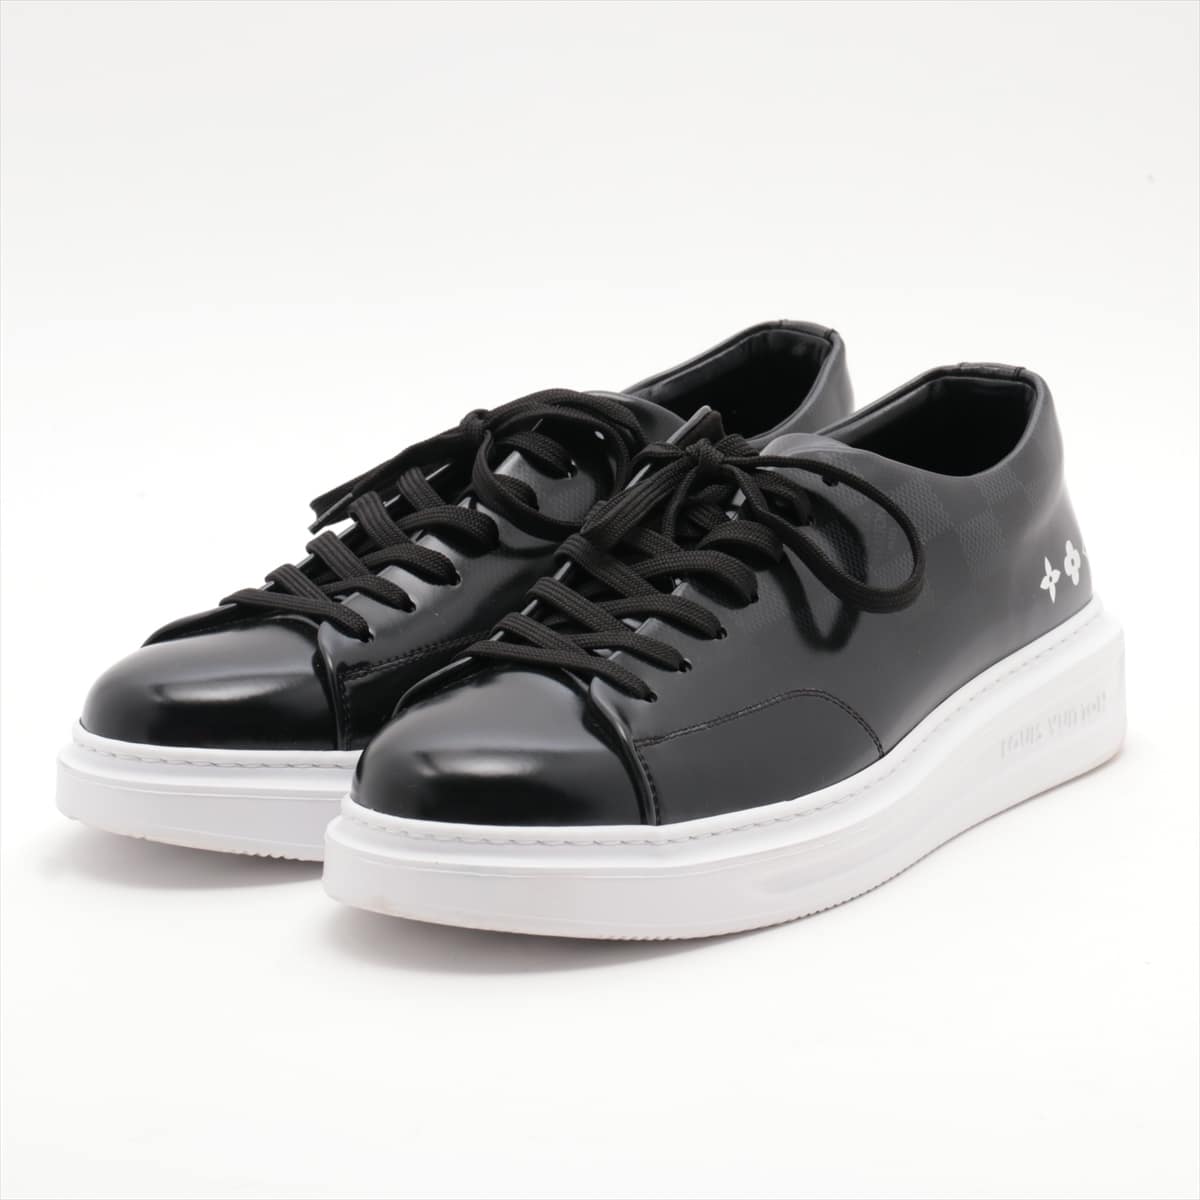 Louis Vuitton Beverly Hills Line 19-year Patent leather Sneakers 7 Men's Black Monogram Flower Damier FA0179